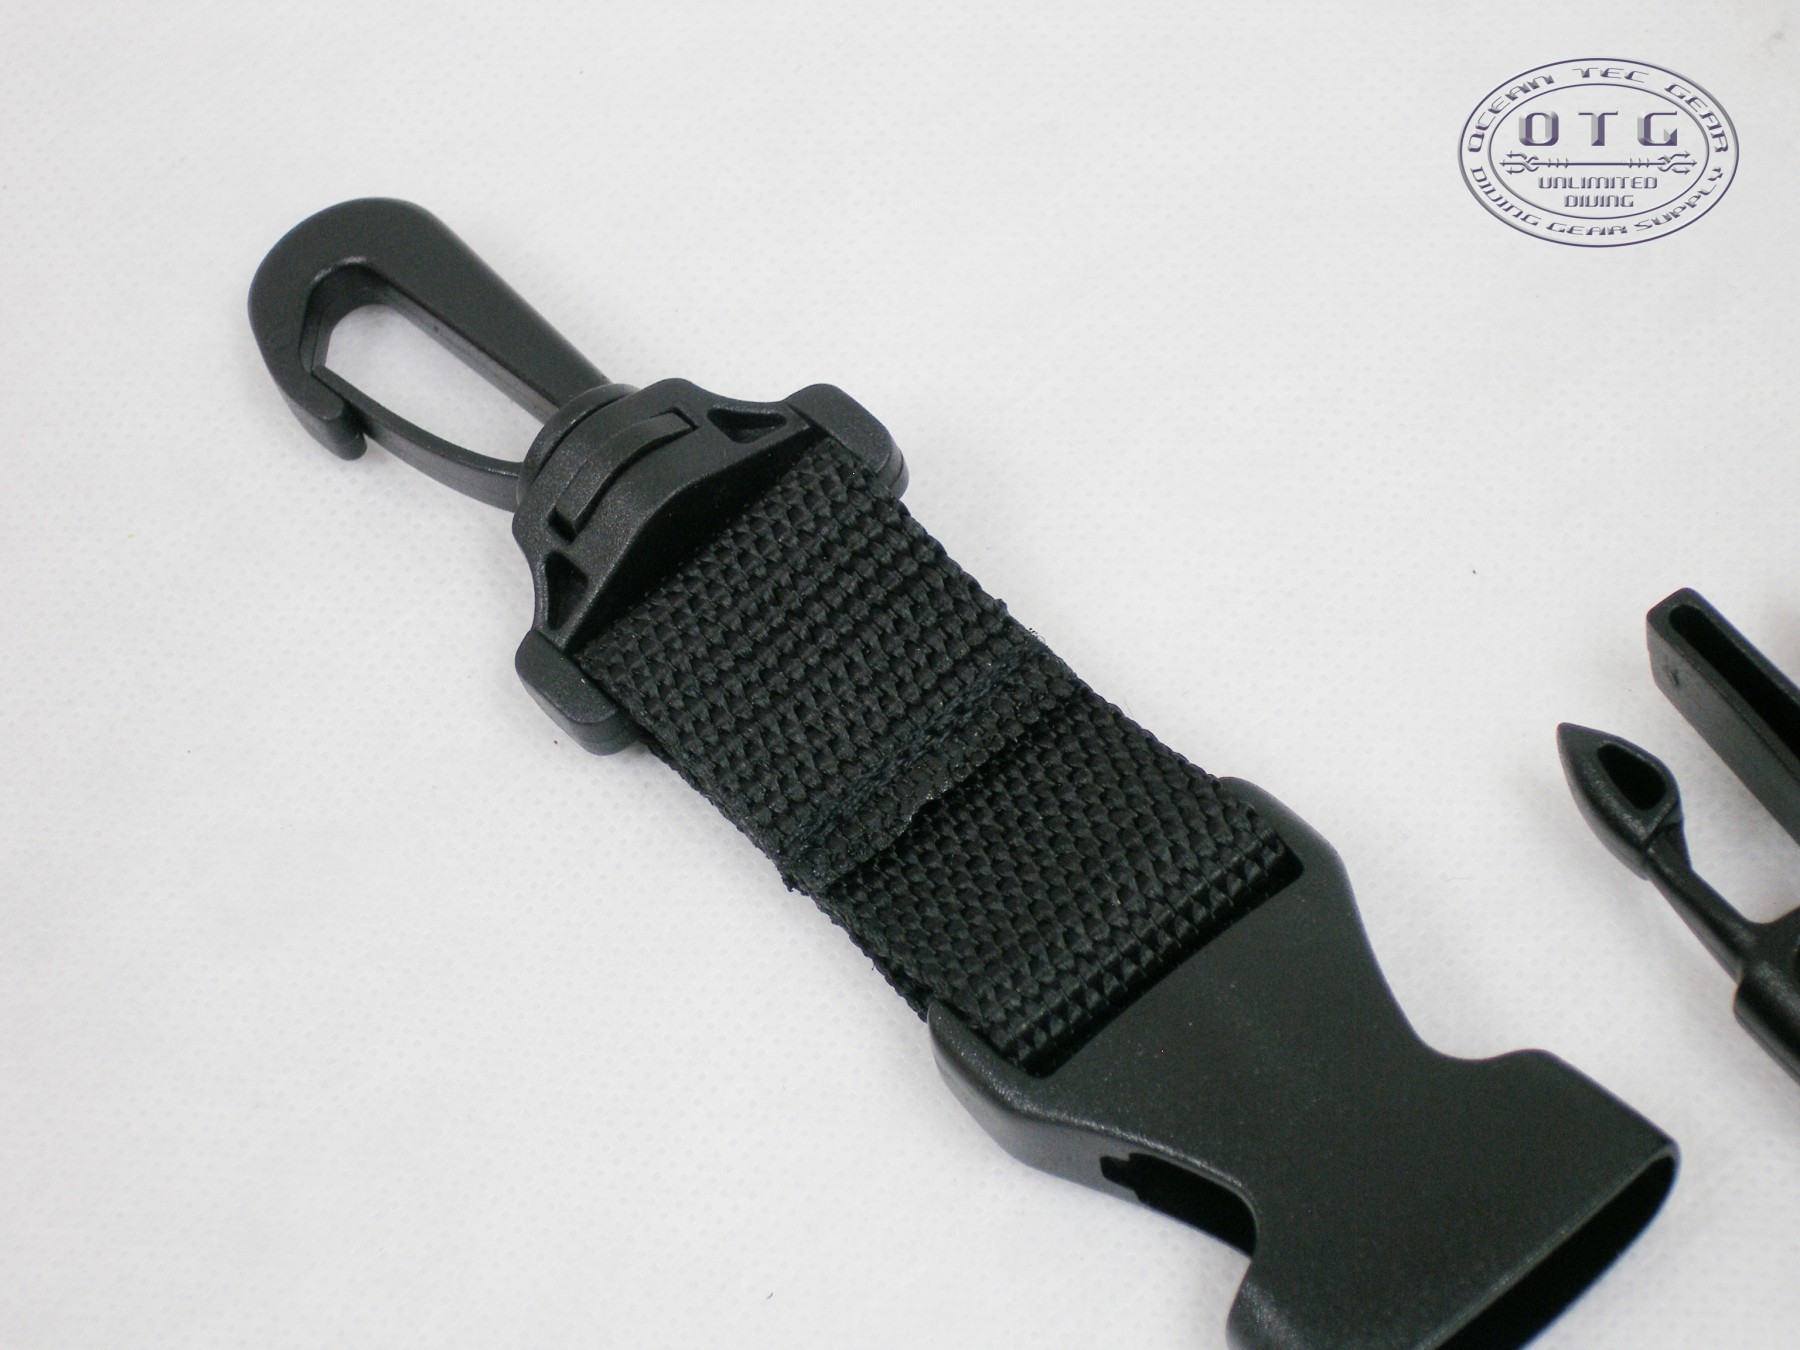 Scuba Diving Dive Black Lanyard Clip with Webbing Strap Quick Release Buckle